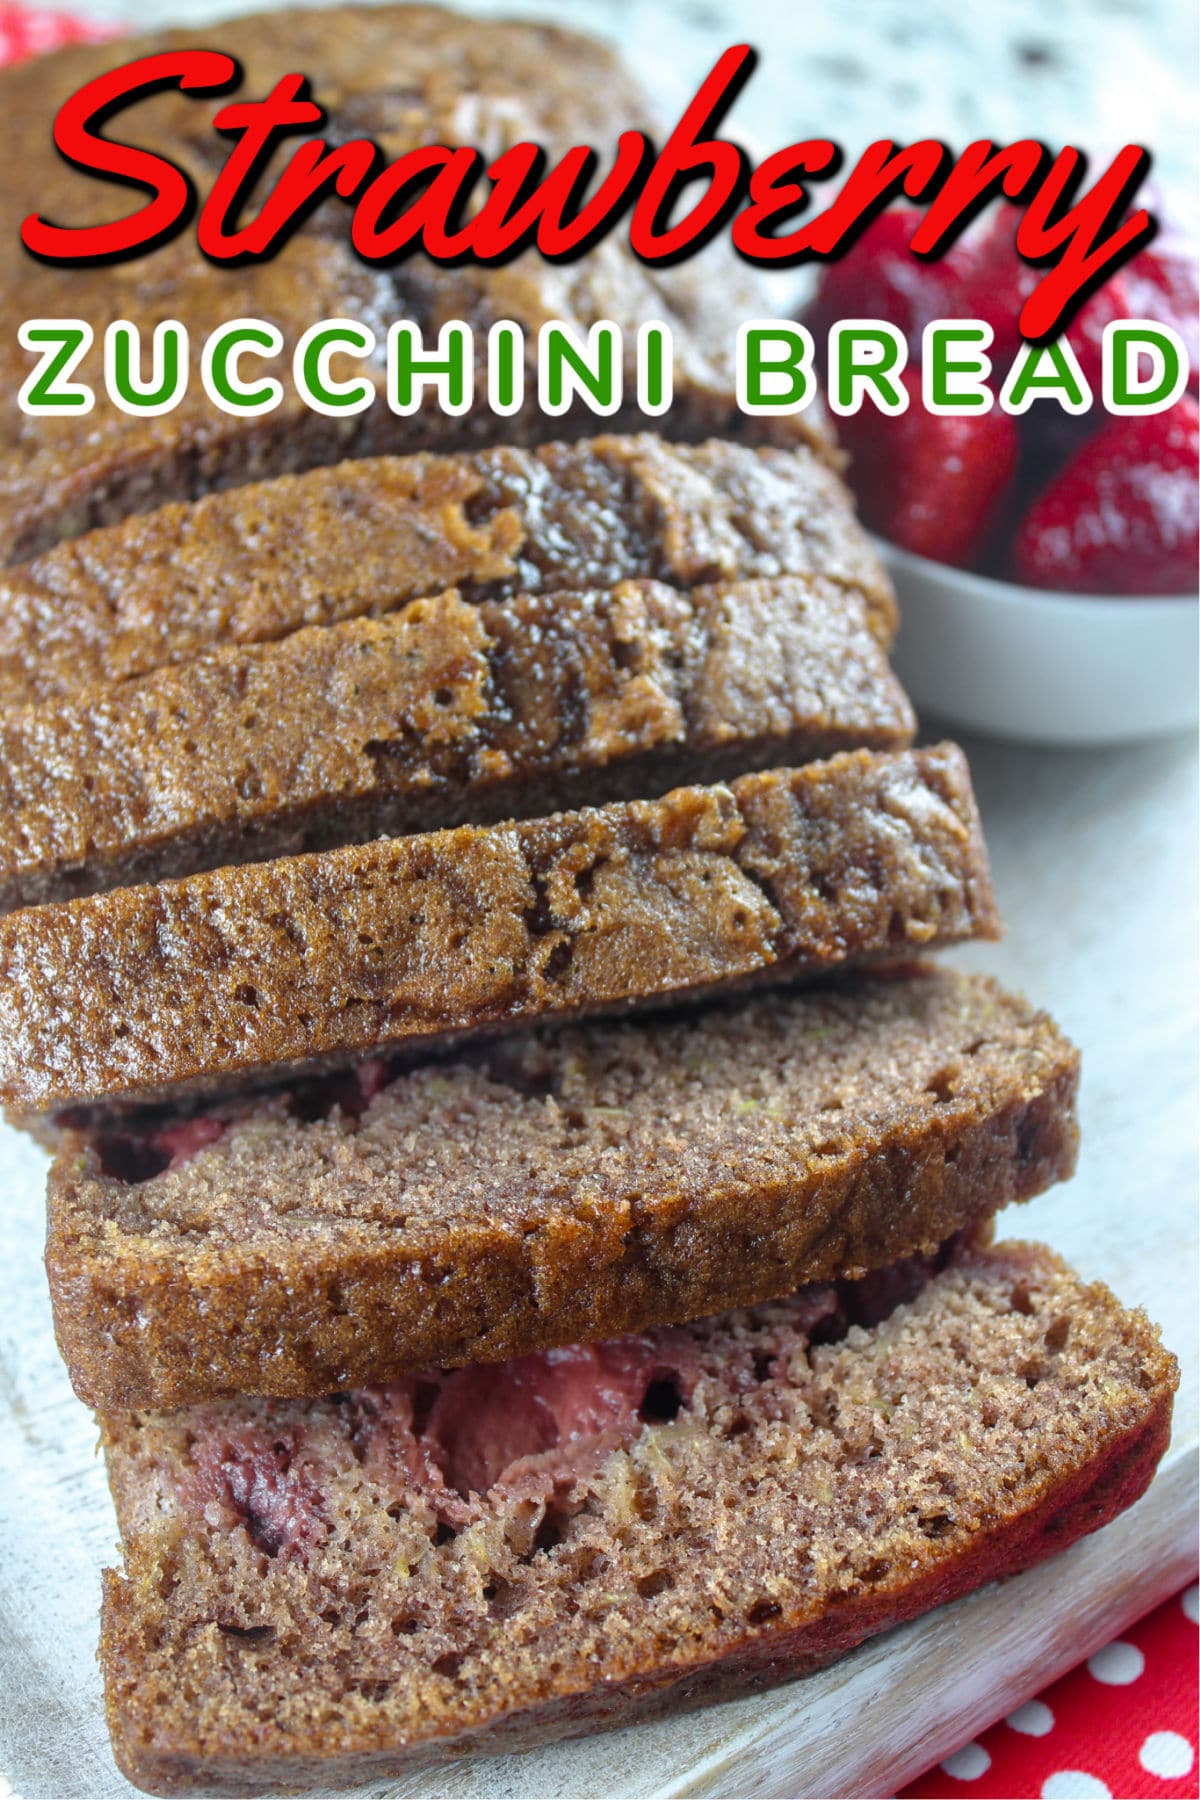 Earlier this year, I discovered the wonders of Zucchini Bread! I liked it so much I wanted to make it again - but this time I jazzed it up with Strawberries from a local grower. But whether you have fresh or frozen - strawberry zucchini bread will definitely be a favorite in your house! via @foodhussy